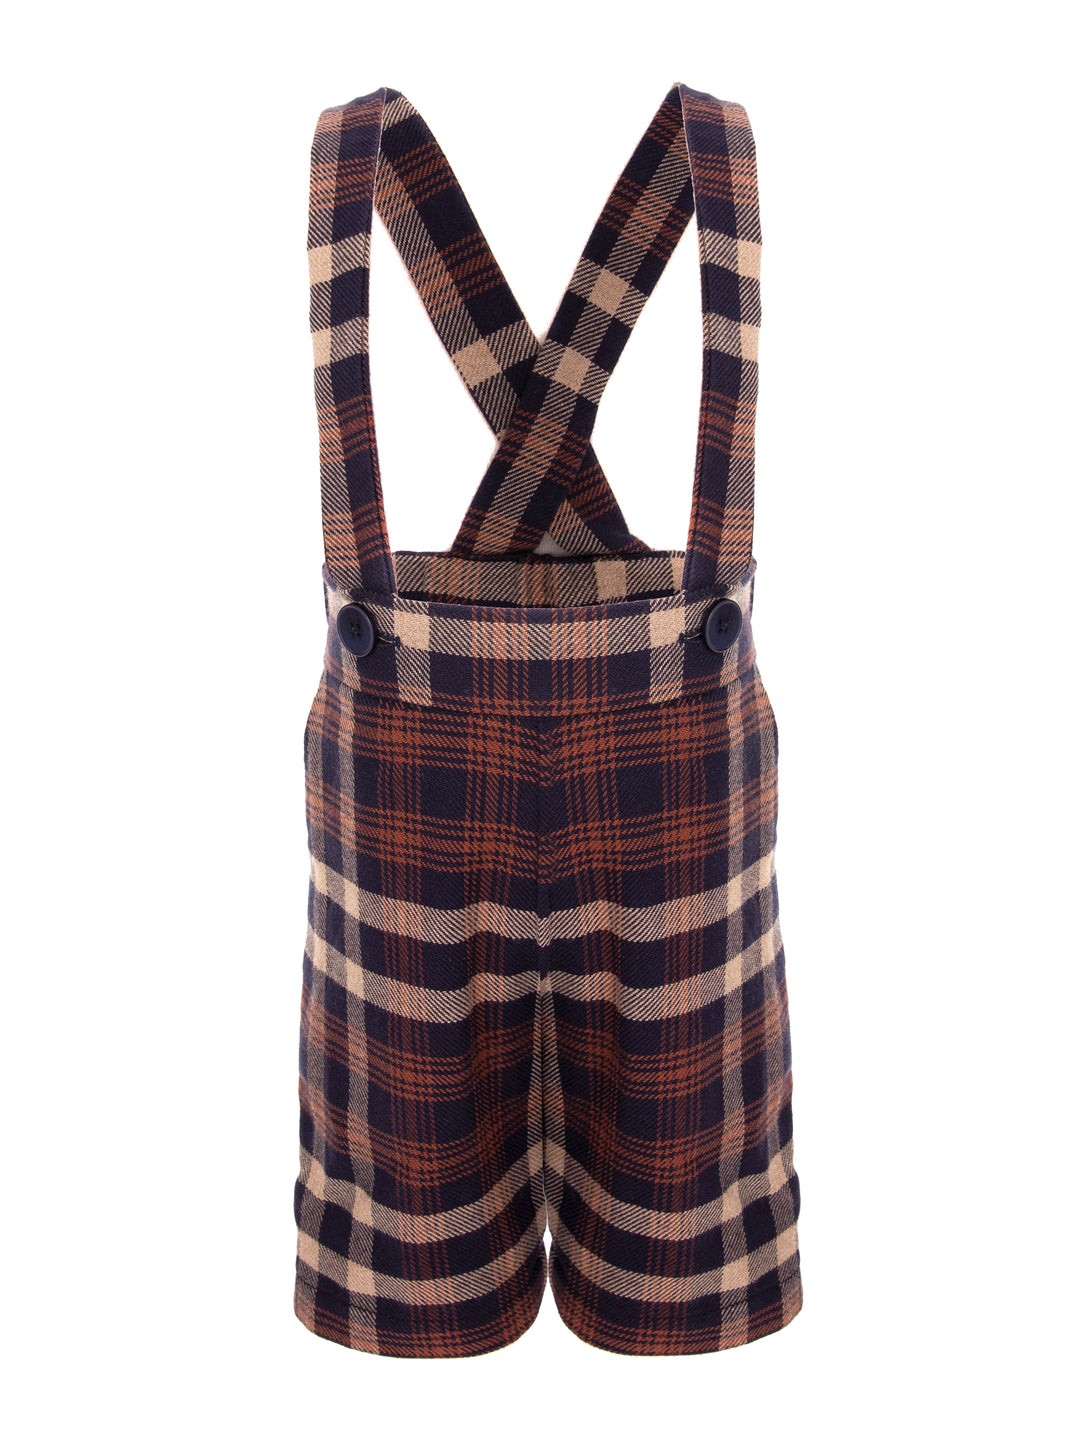 CLEMENT SHORT PANTS  BROWN AND BLUE PLAIDS WITH SUSPENDERS